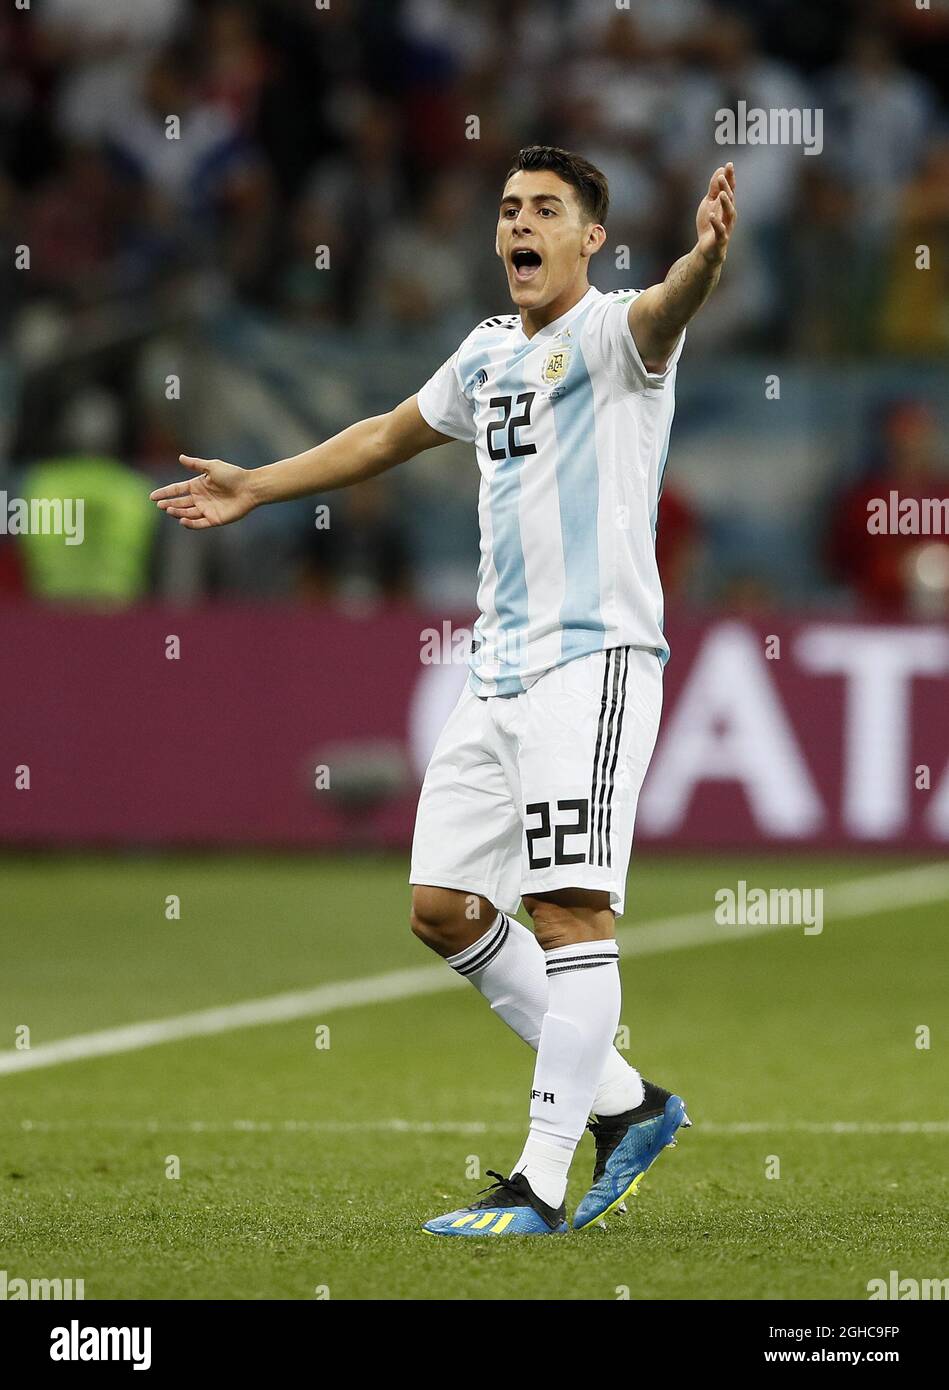 Argentina's cristian Pavon in action during the FIFA World Cup 2018 Group D match at the Nizhny Novgorod Stadium, Nizhny Novgorod. Picture date 21st June 2018. Picture credit should read: David Klein/Sportimage via PA Images Stock Photo